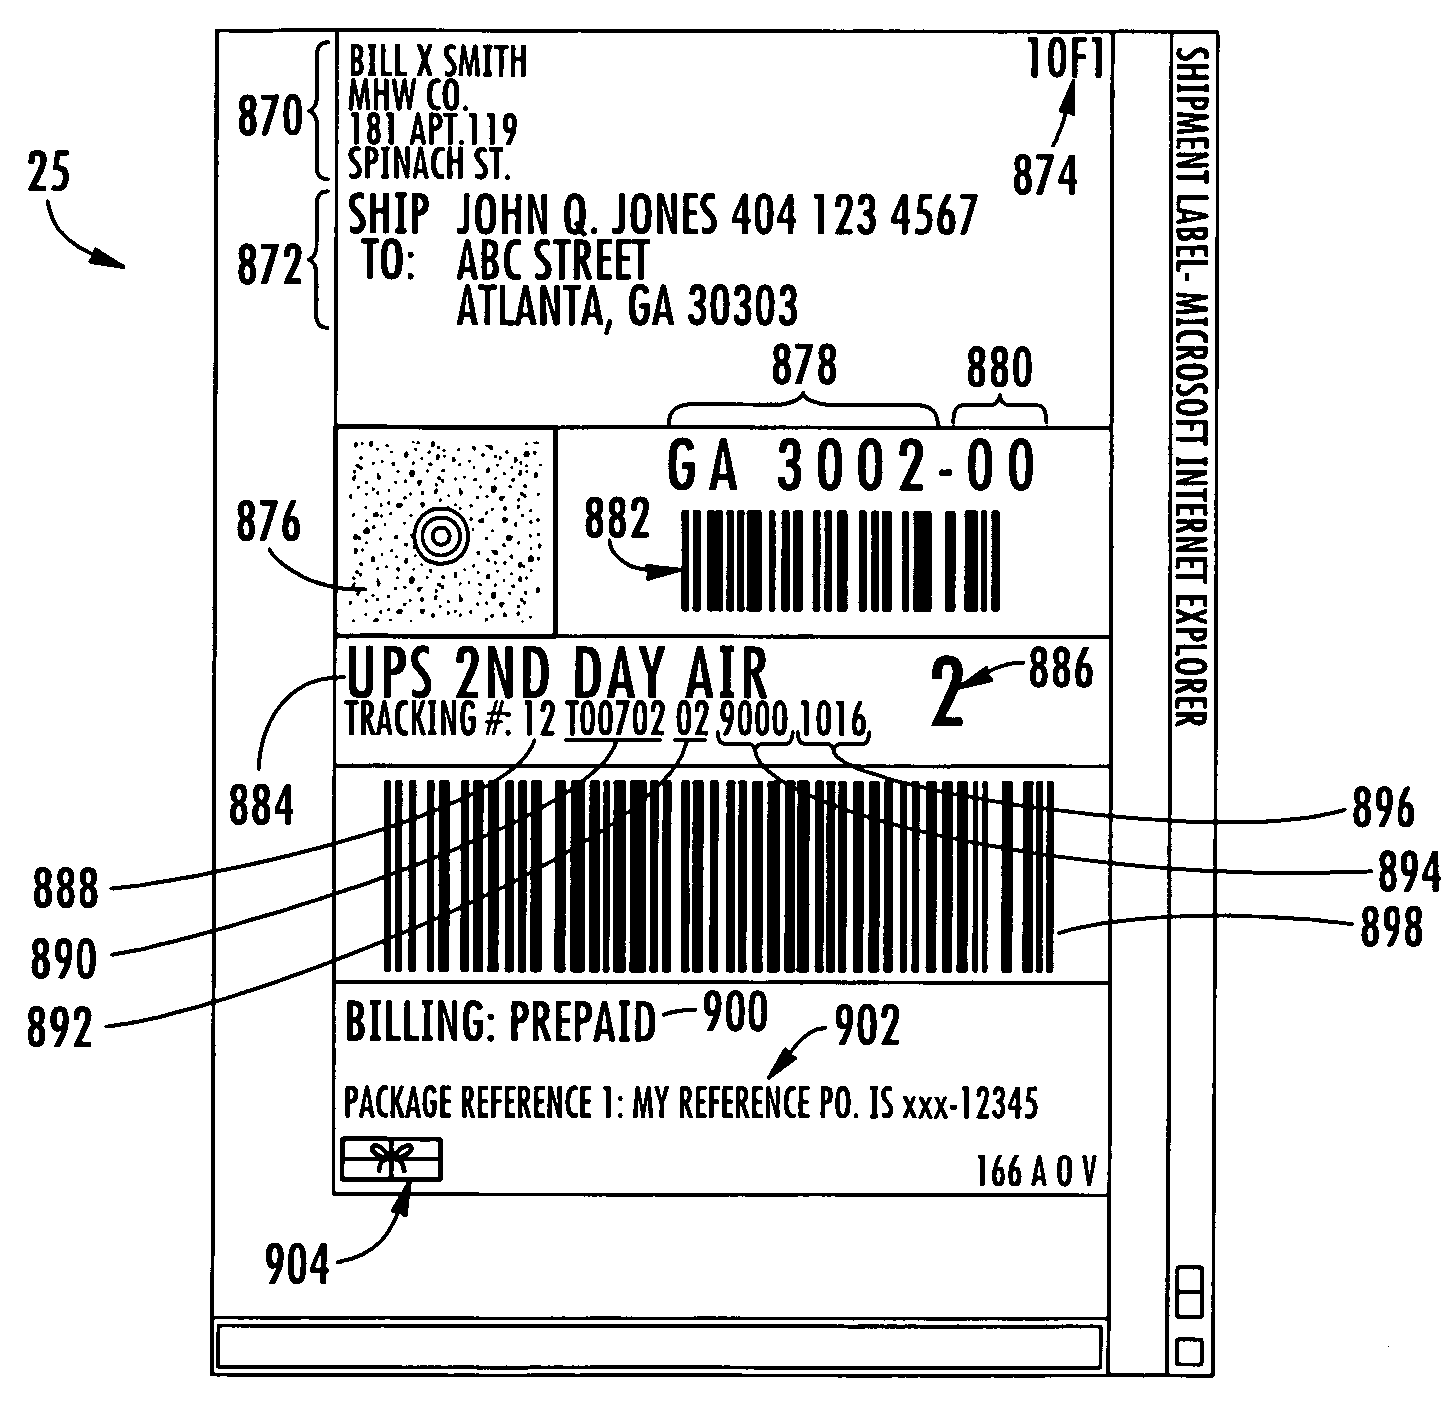 Method for providing a shipping label via an intermediary's website